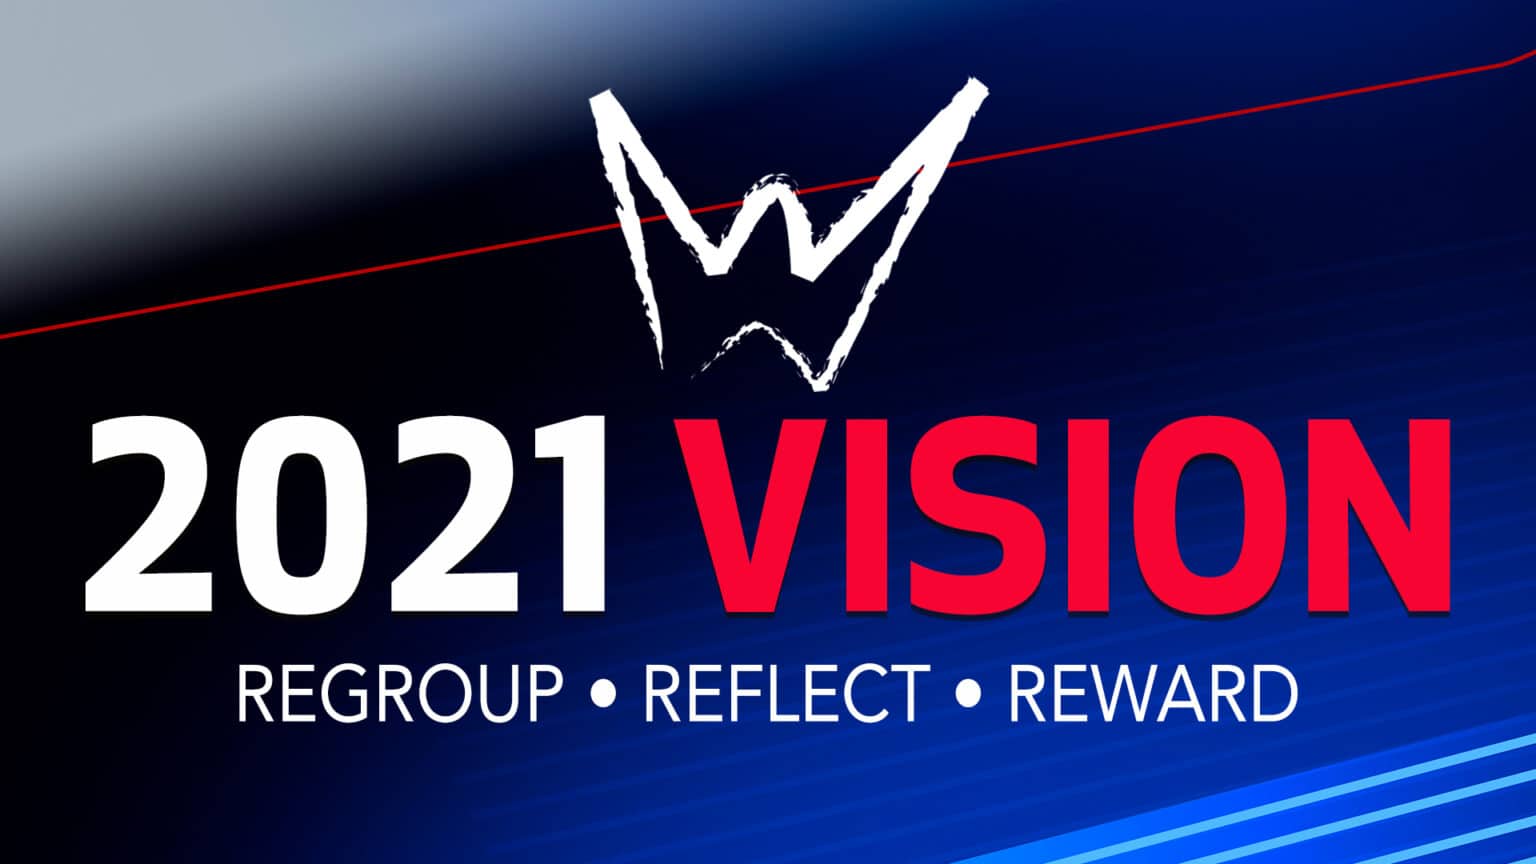 Vision 2021, Part 4 | Without Limits Christian Center